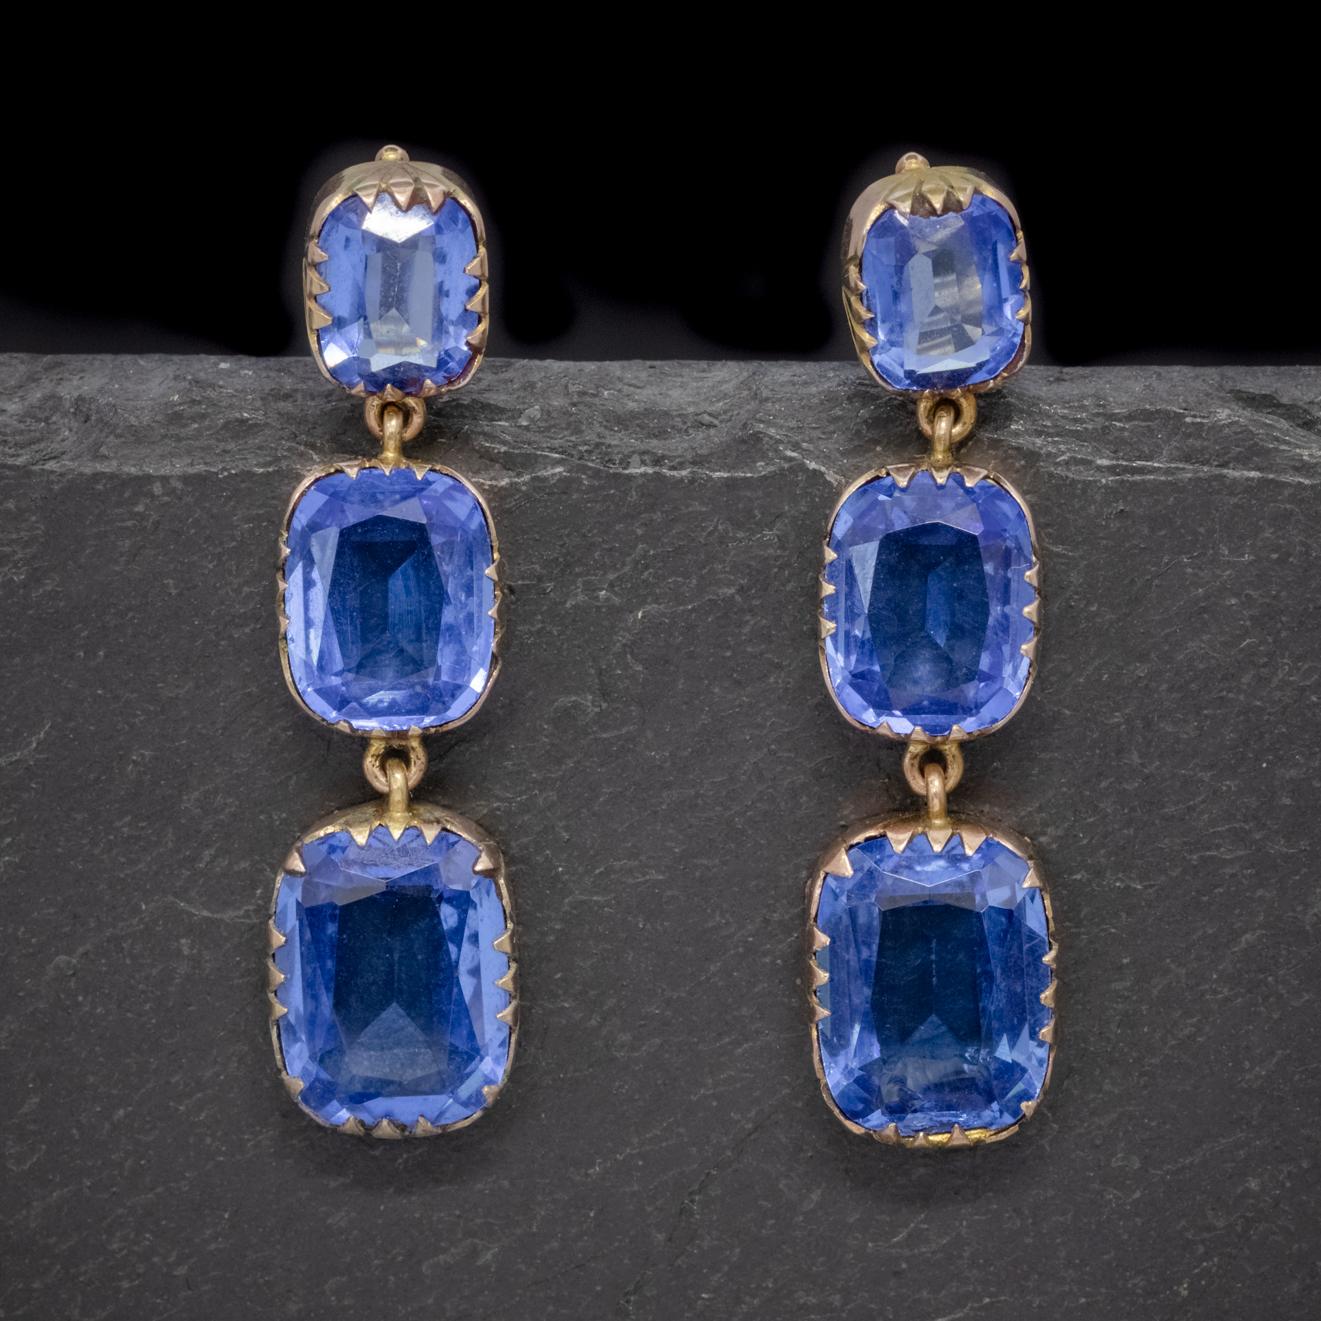 Late Victorian Antique Victorian Blue Paste Earrings 9 Carat Gold, circa 1900